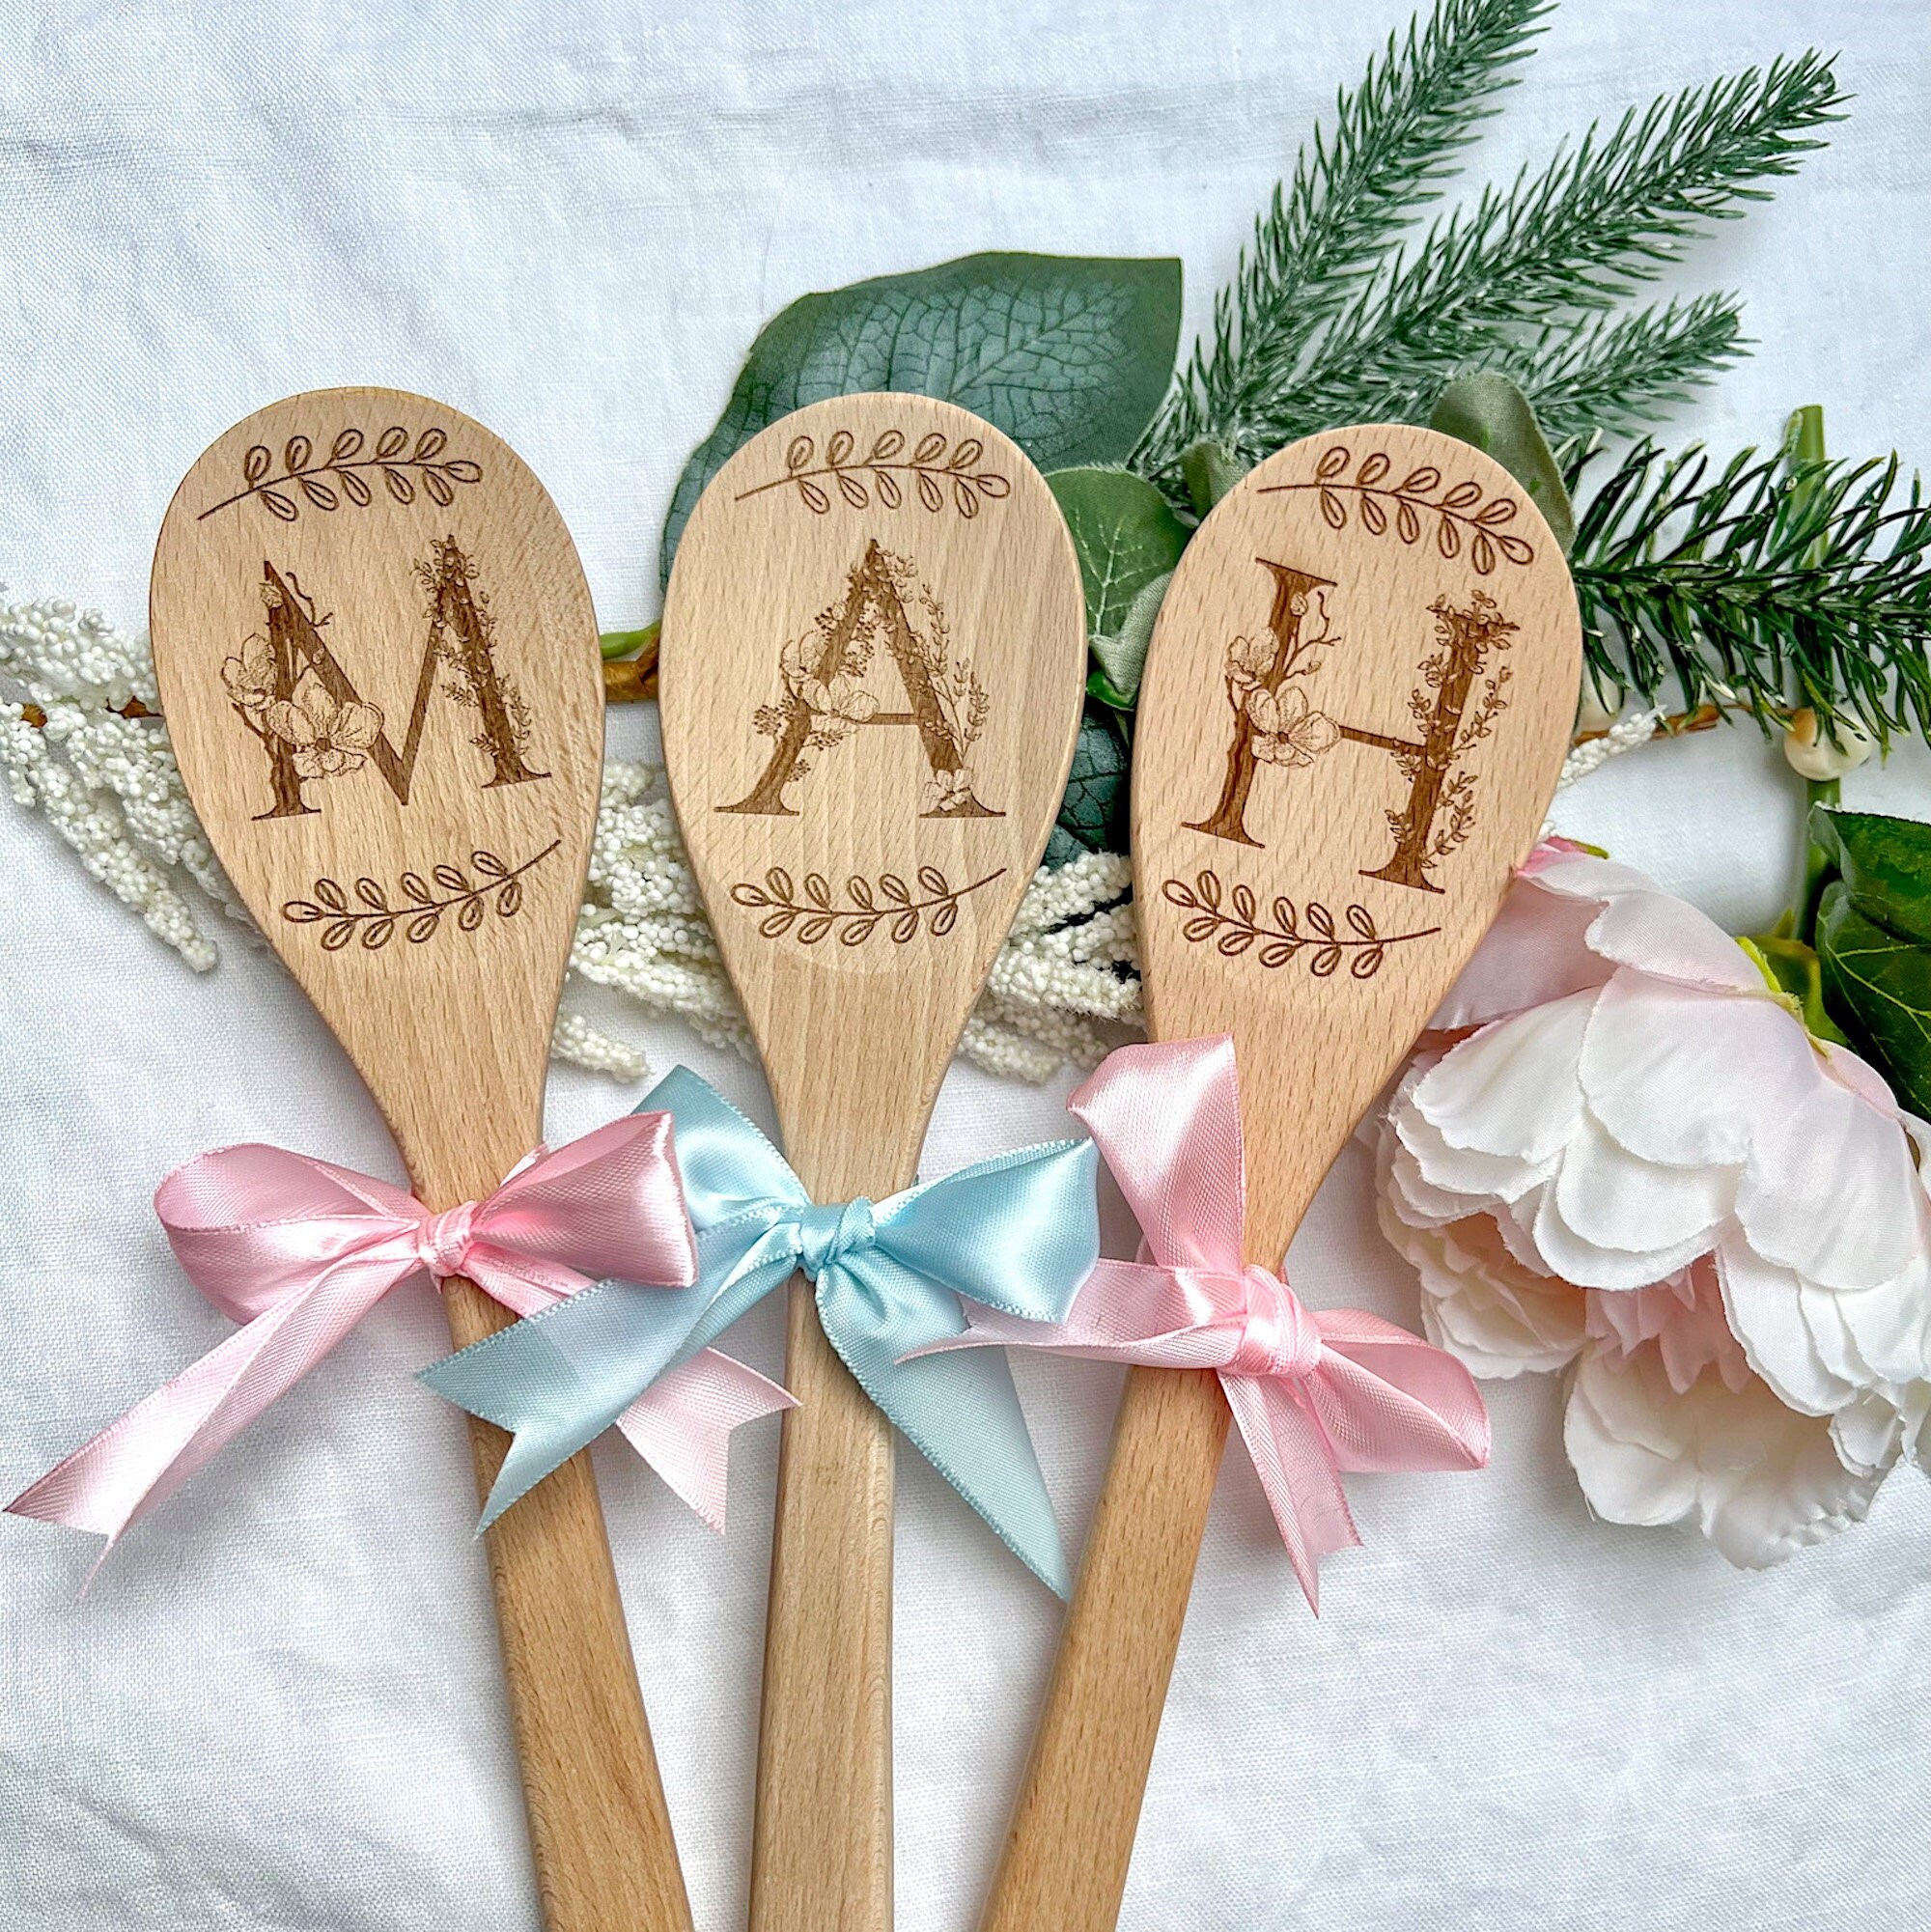 Personalised Engraved Wooden Spoon Custom Text Baking Baker Chef Star Baker  Your Text Here Birthday Christmas Housewarming 